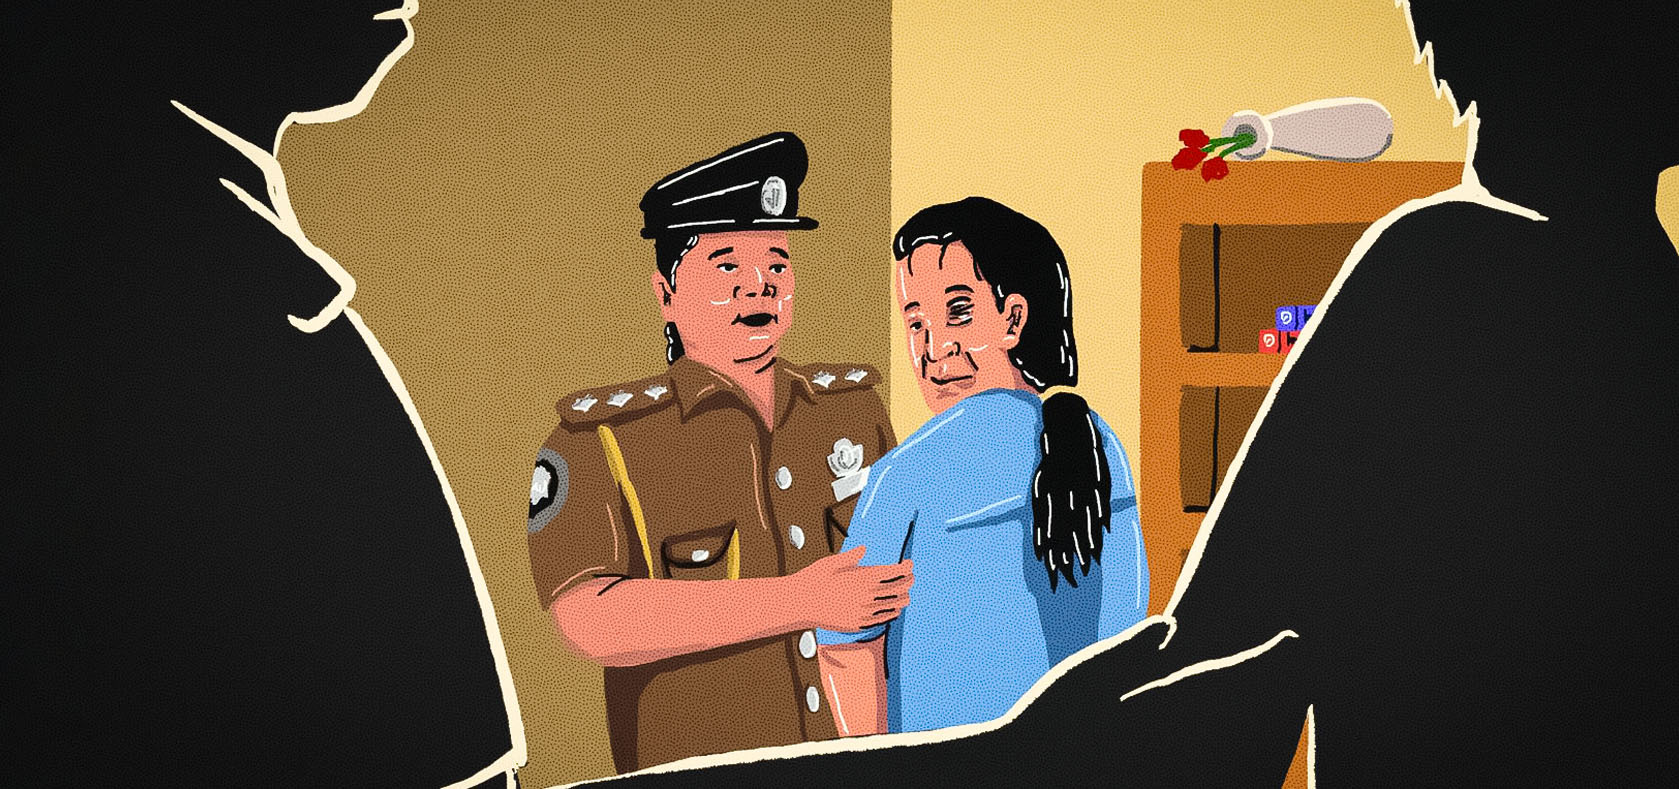 Sanjeewani comforting a woman who has been subject to domestic violence while the perpetrator is being escorted by another officer. Illustration: UN Women Sri Lanka/Akila Weerasinghe